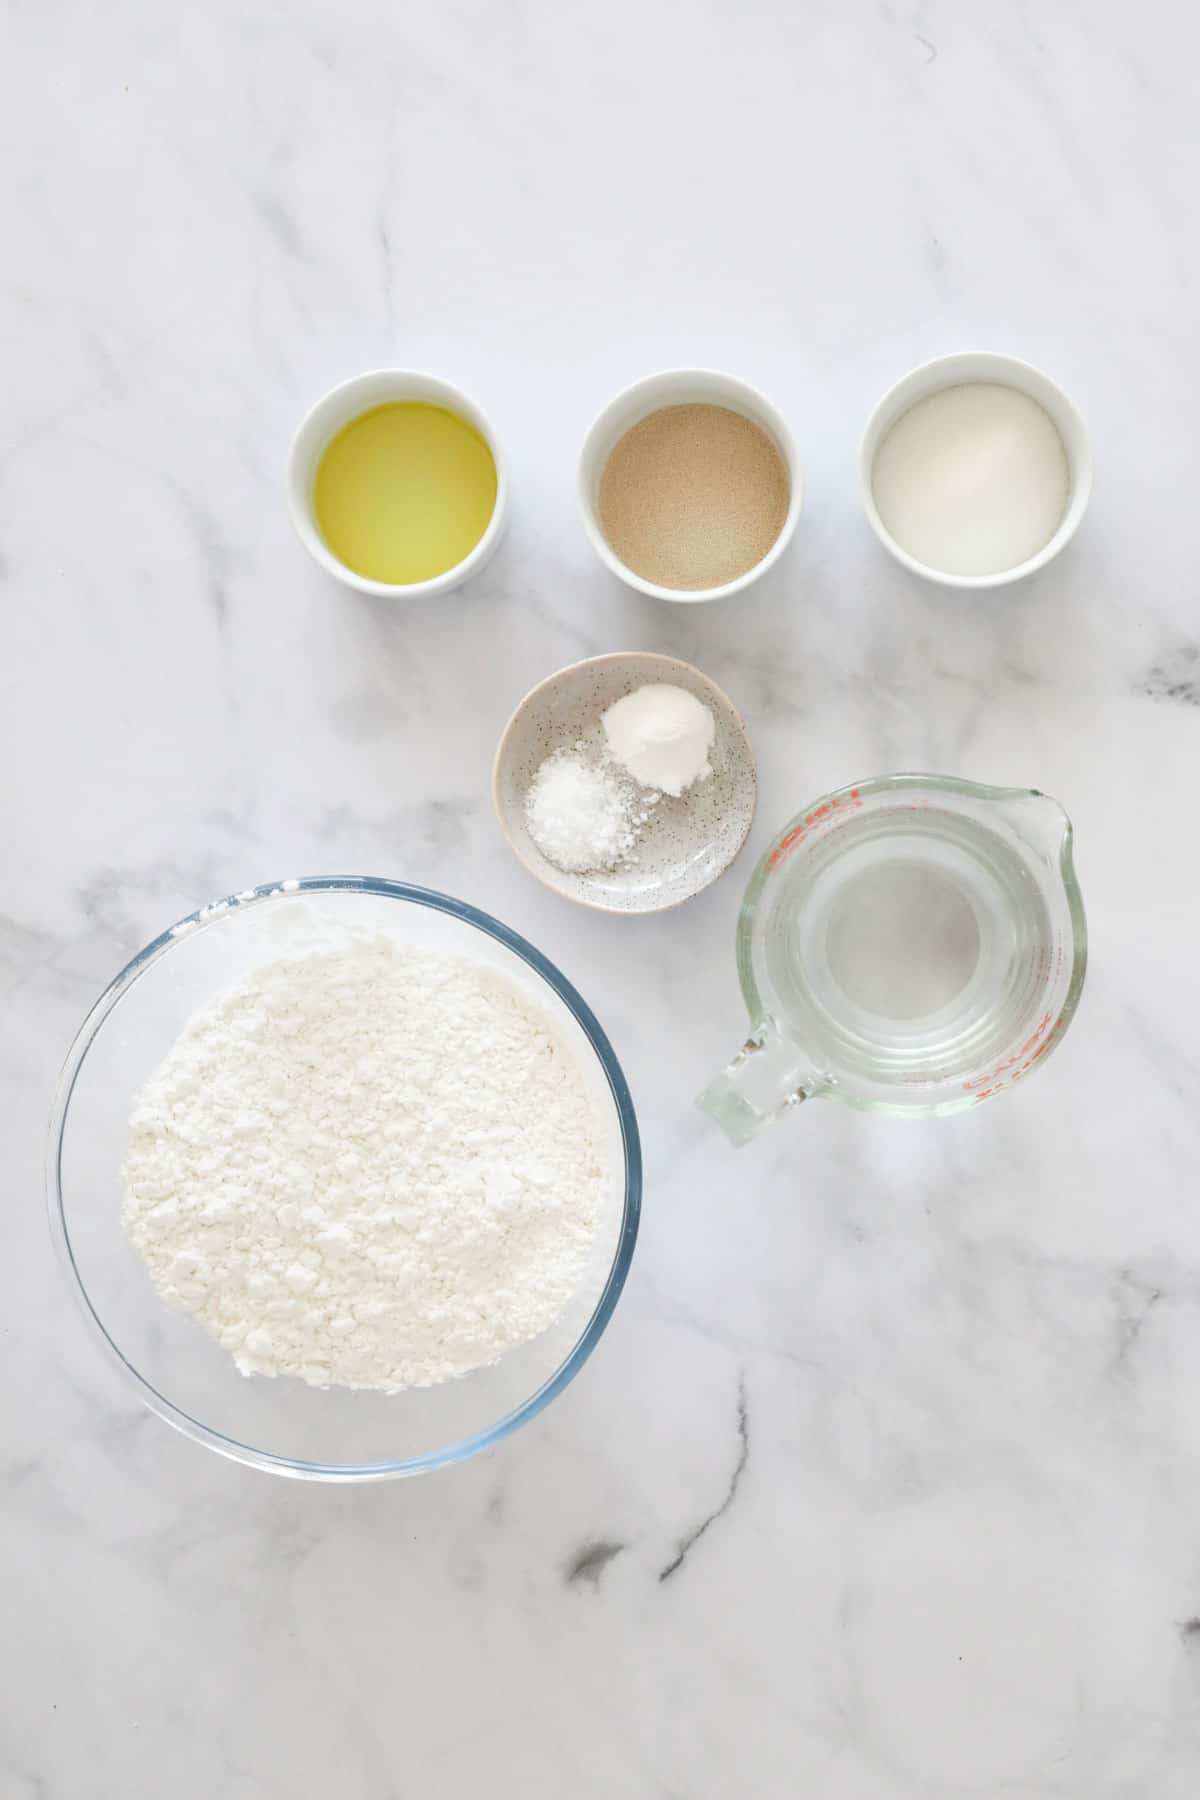 The ingredients for Gluten Free Pizza Dough.